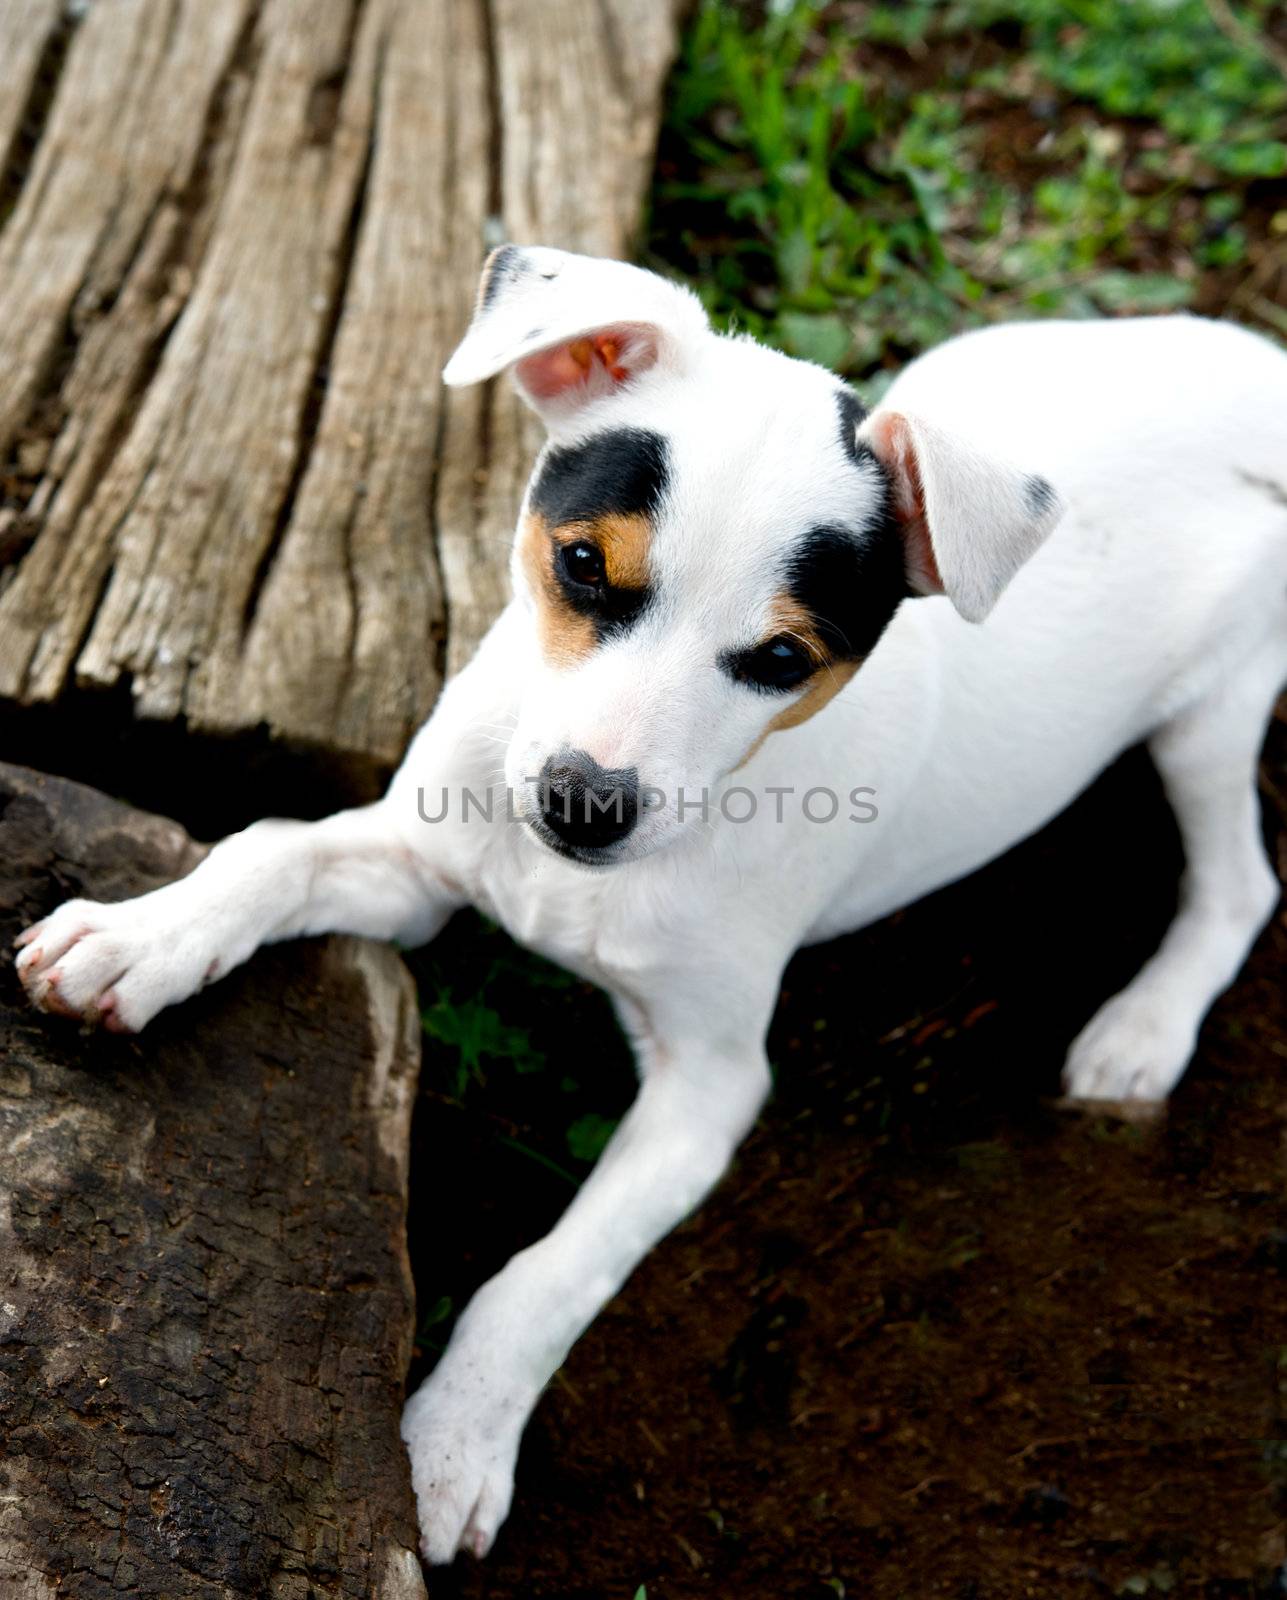 Puppy terrier in the garden by xandronico